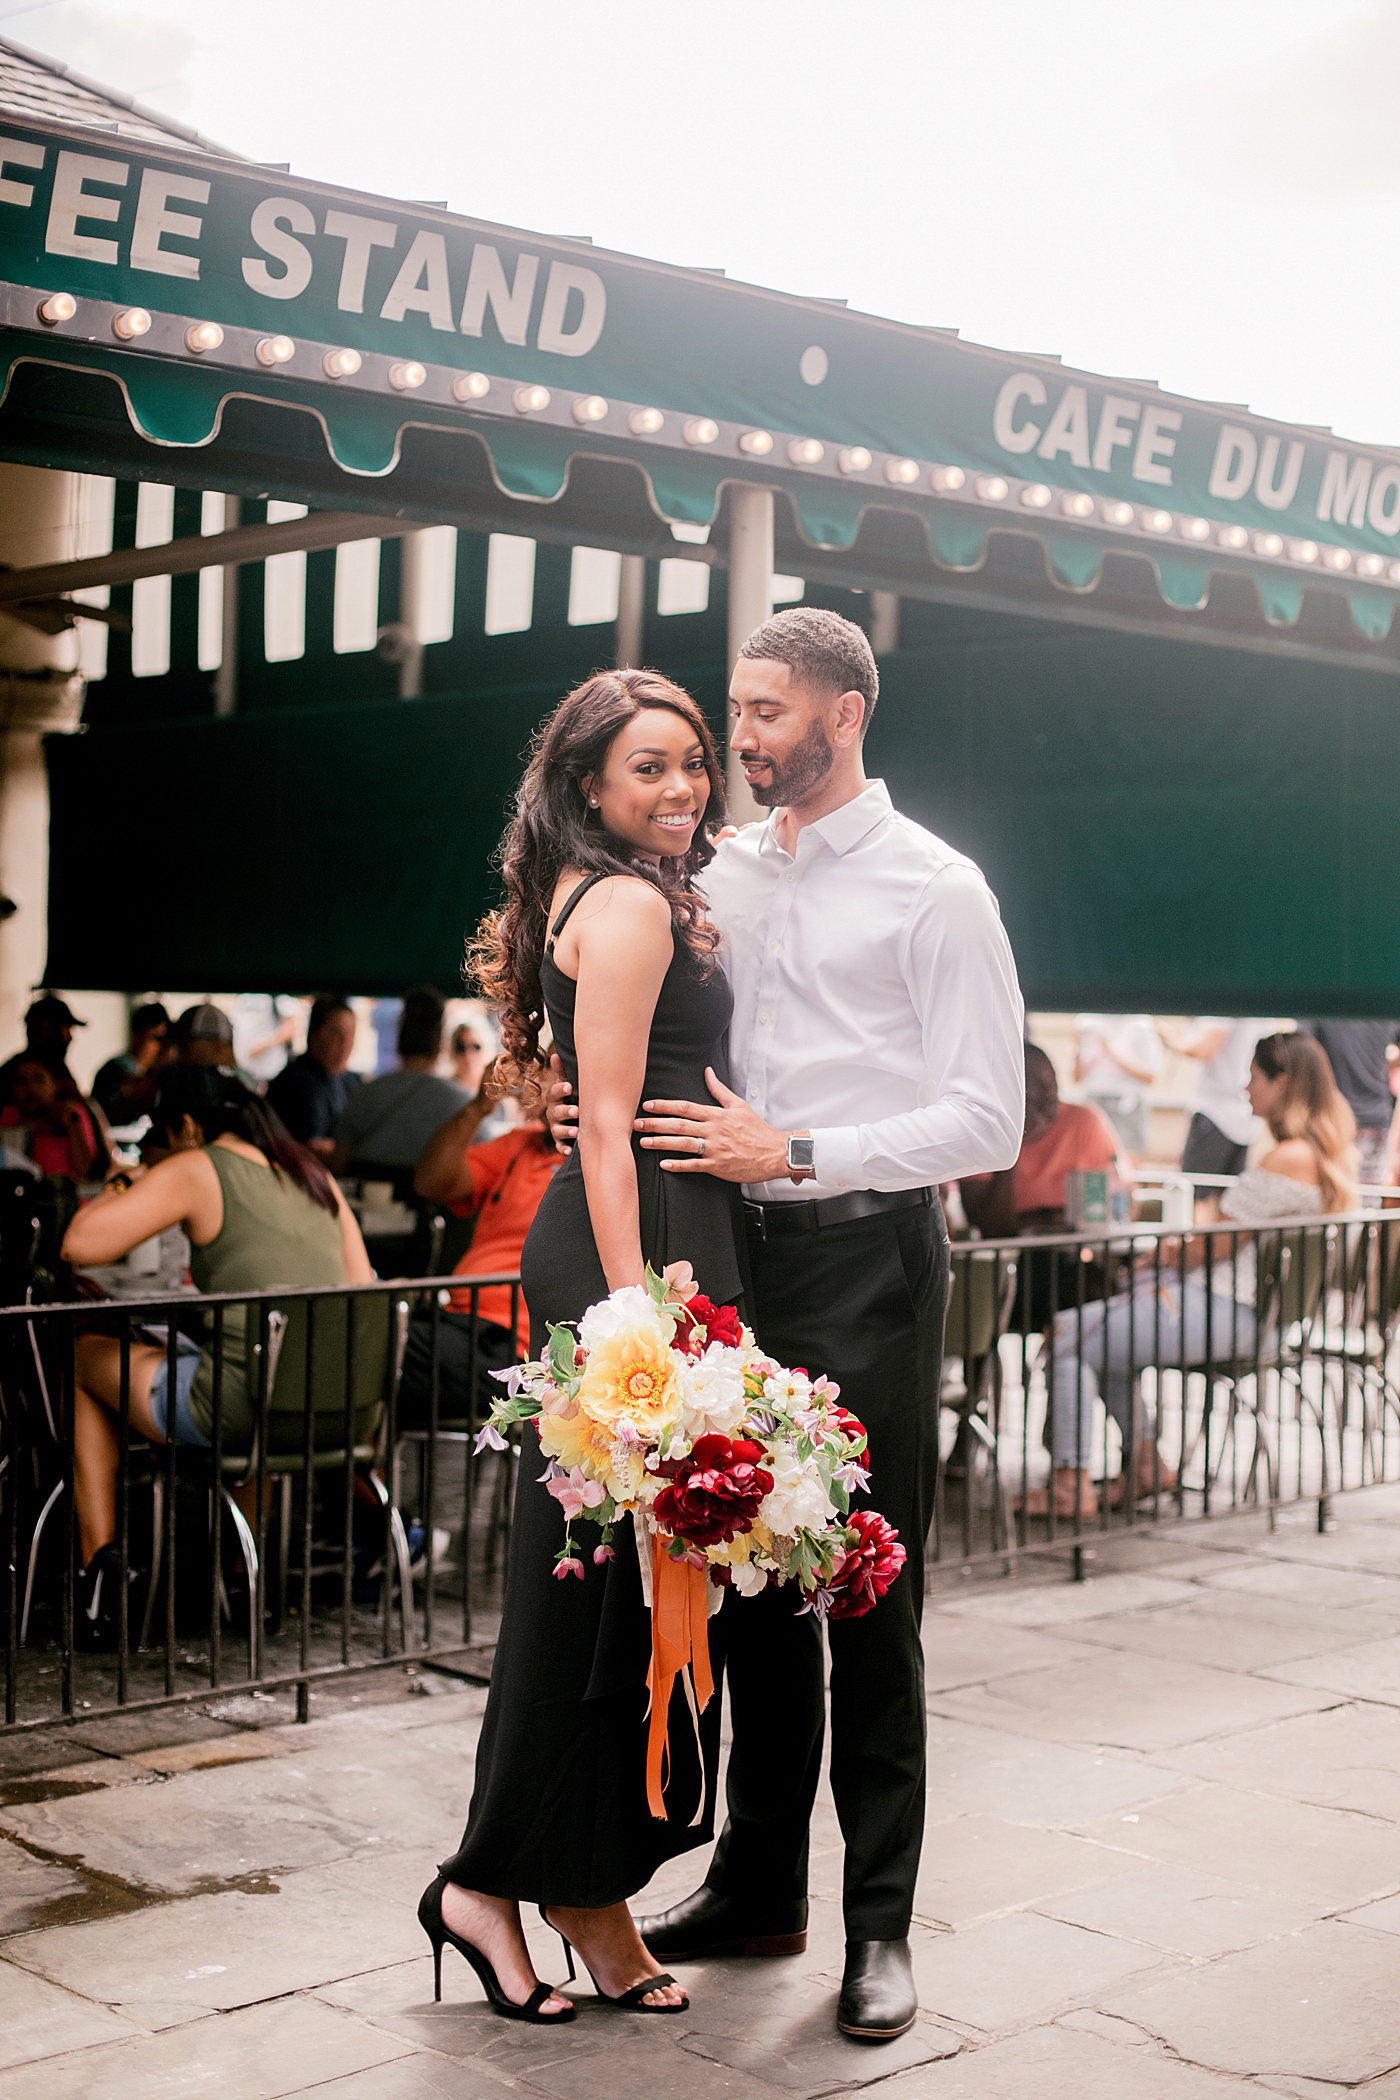 Couple posing together with a bouquet | Photo by Hope Helmuth Photography